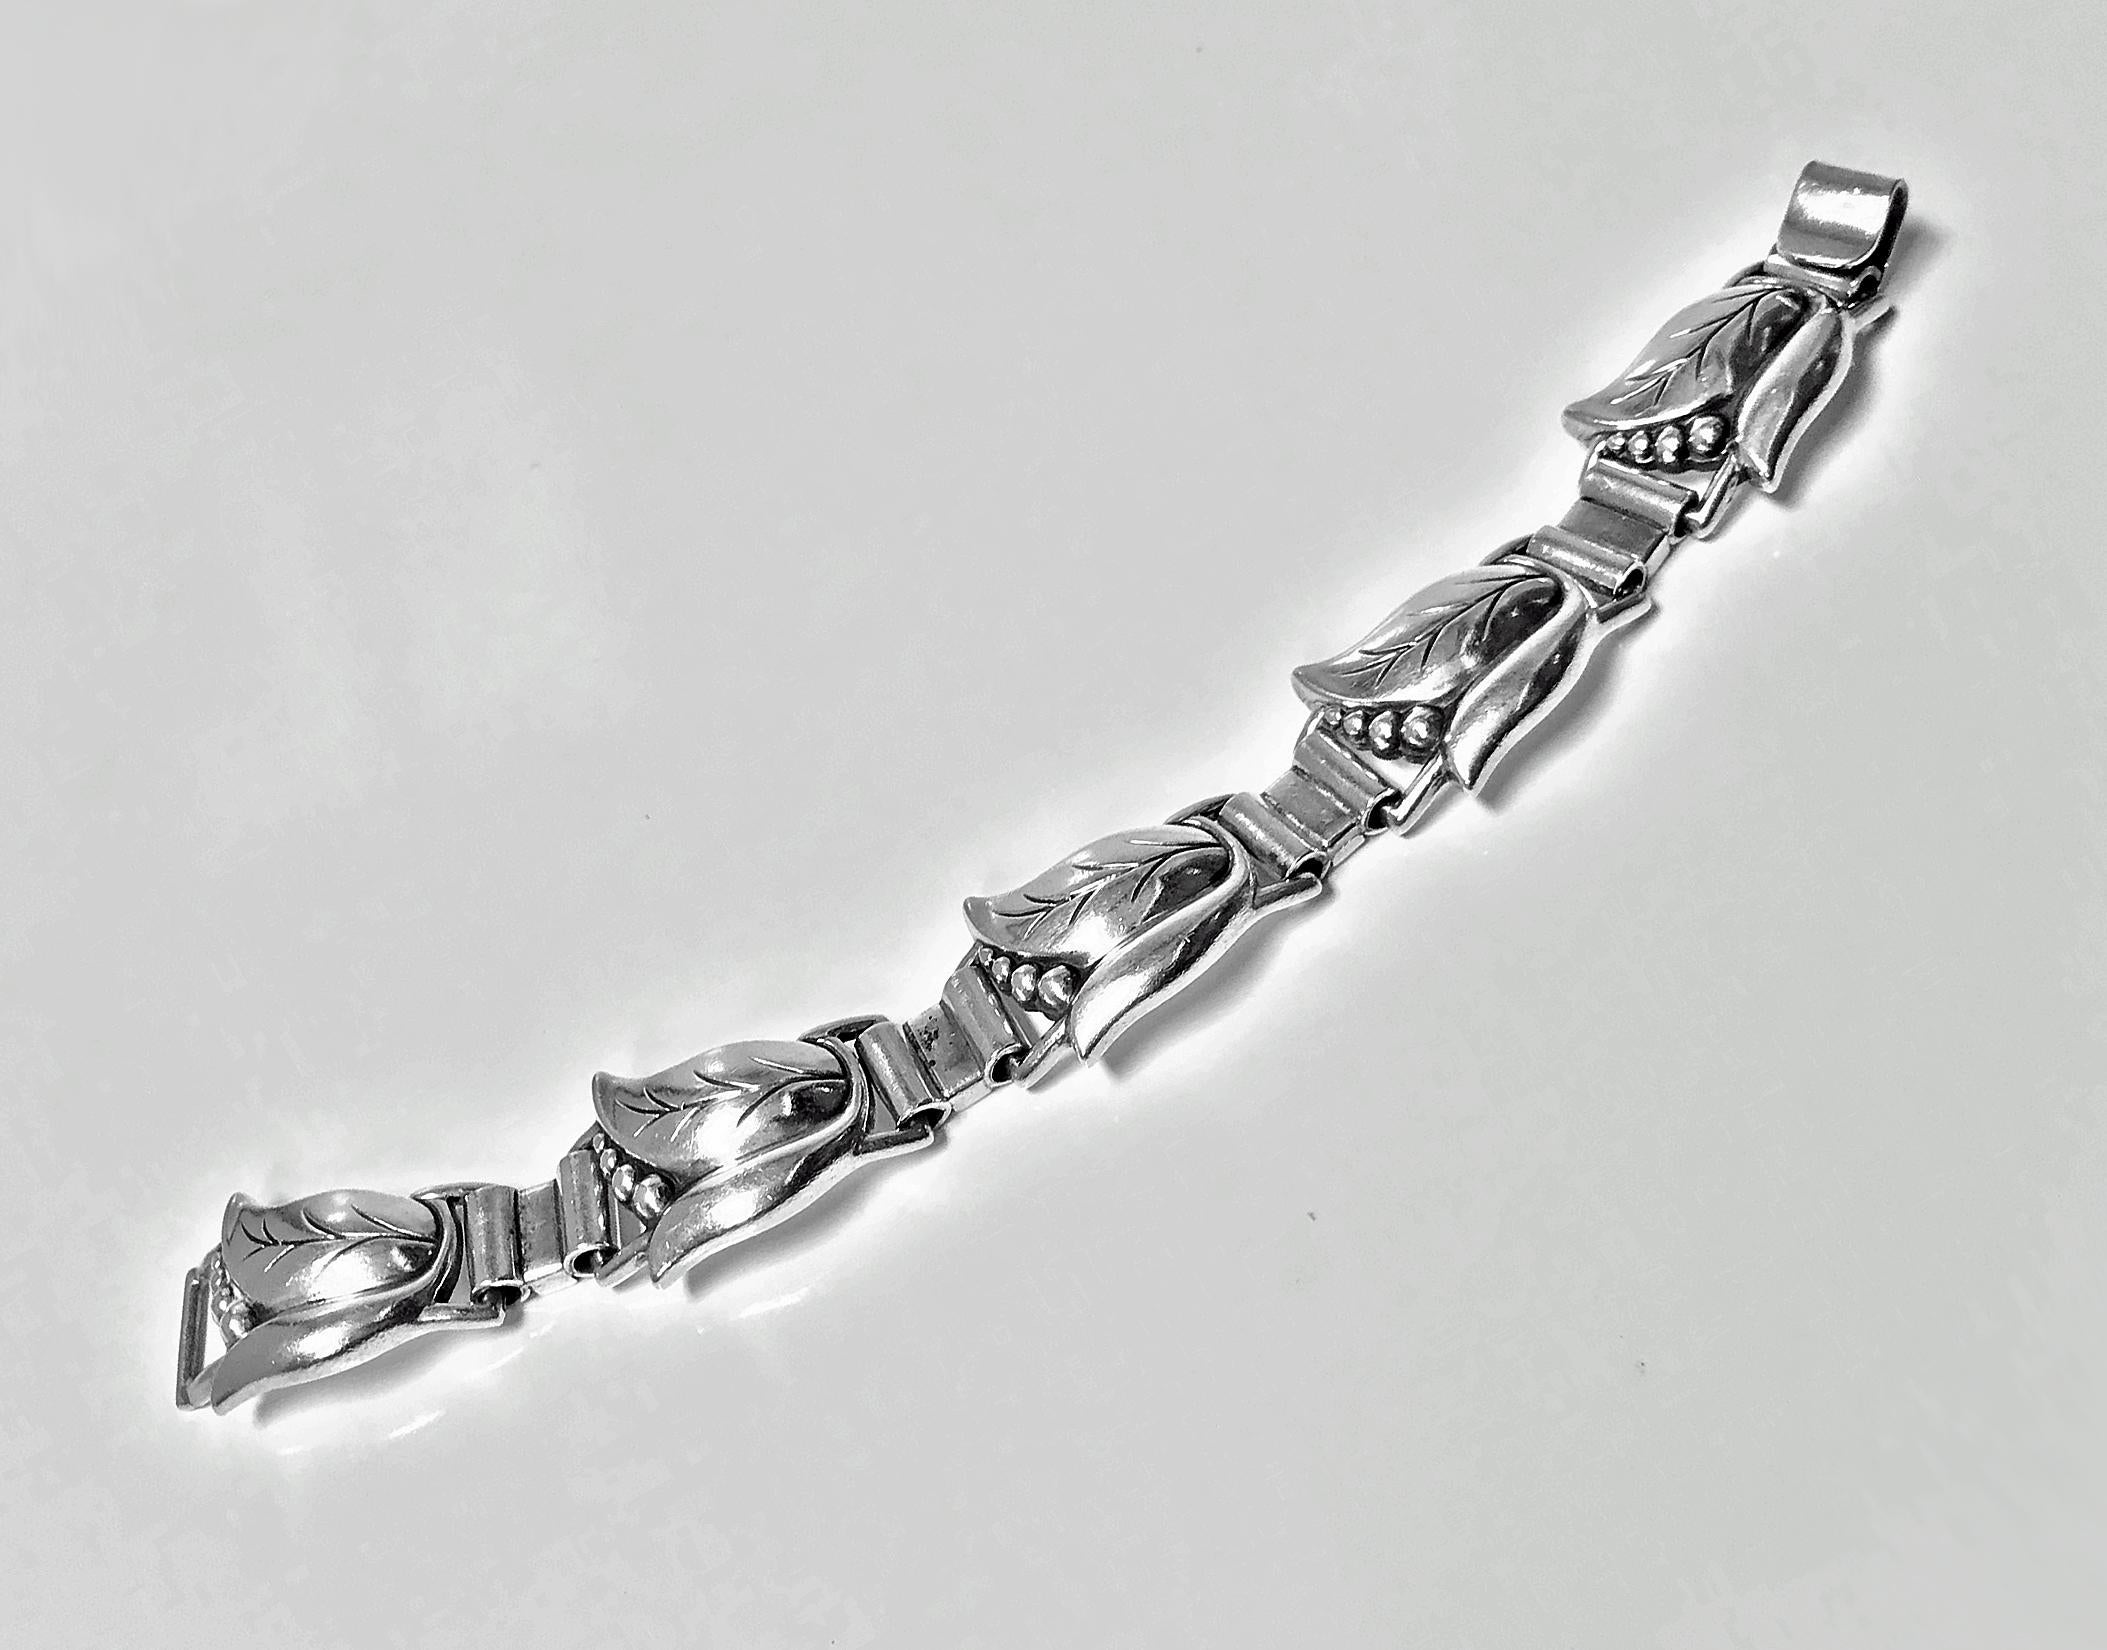 Georg Jensen Sterling Bracelet, C.1940.The Bracelet, fleur danoise design, with hinged stylised tulip bud petal links, Georg Jensen Sterling USA marks to reverse and design number 145 for La Paglia. Illustrated page 67 Jensen Silver by Schiffer and